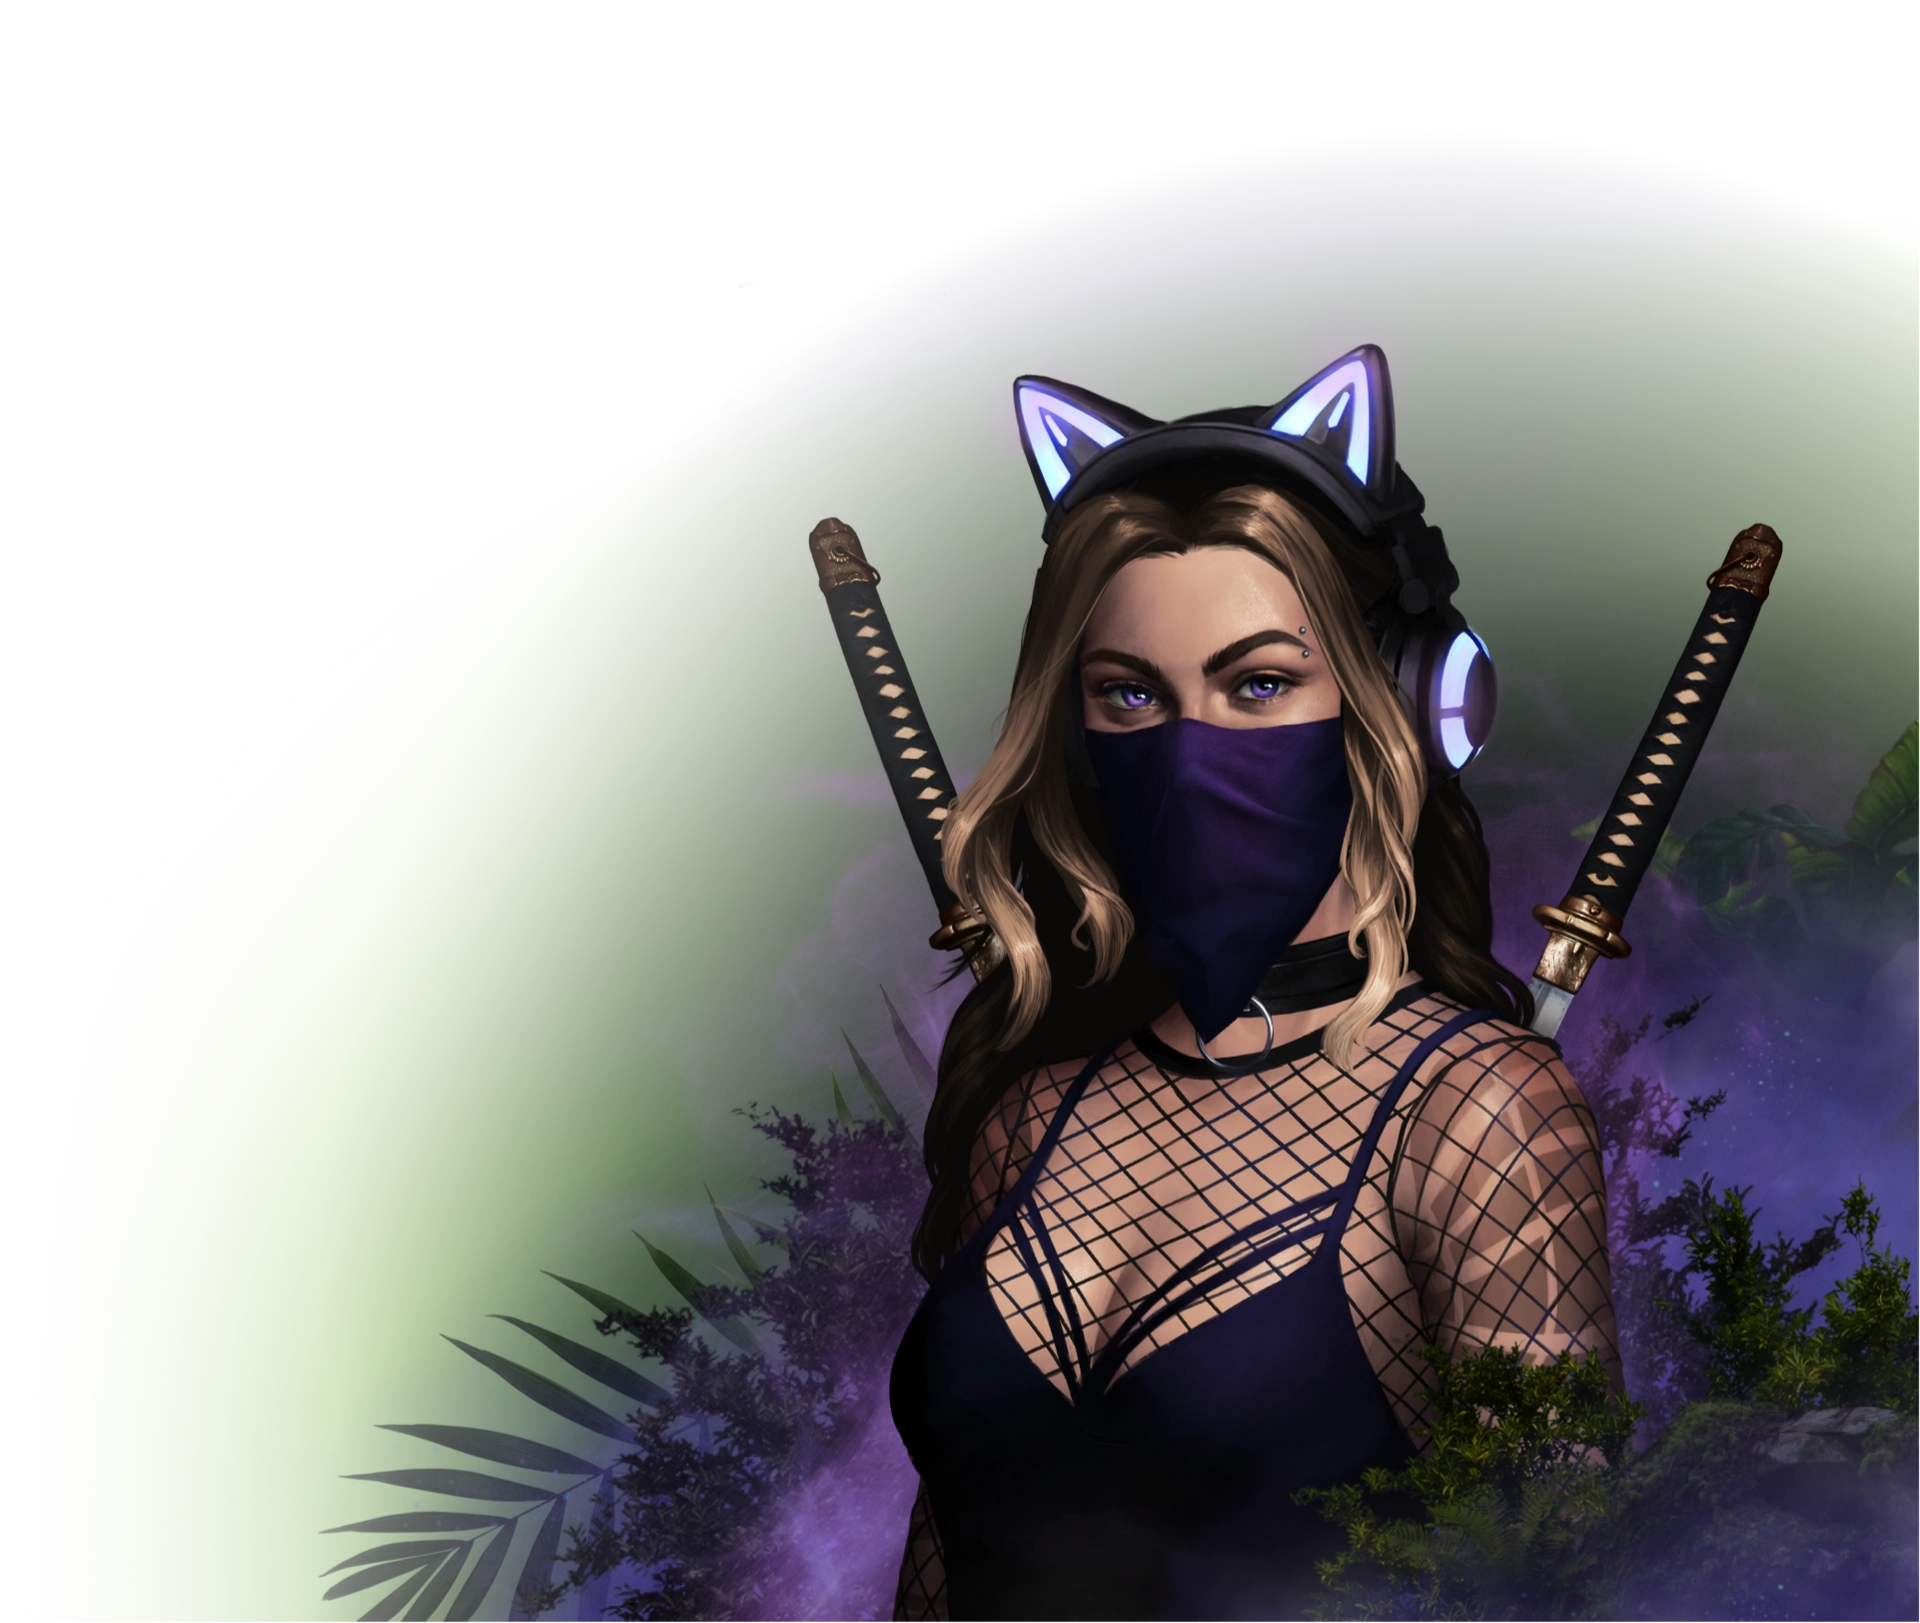 Animated female character carrying swords, and wearing a mask, glowing cat ears and headphones, and a mesh top